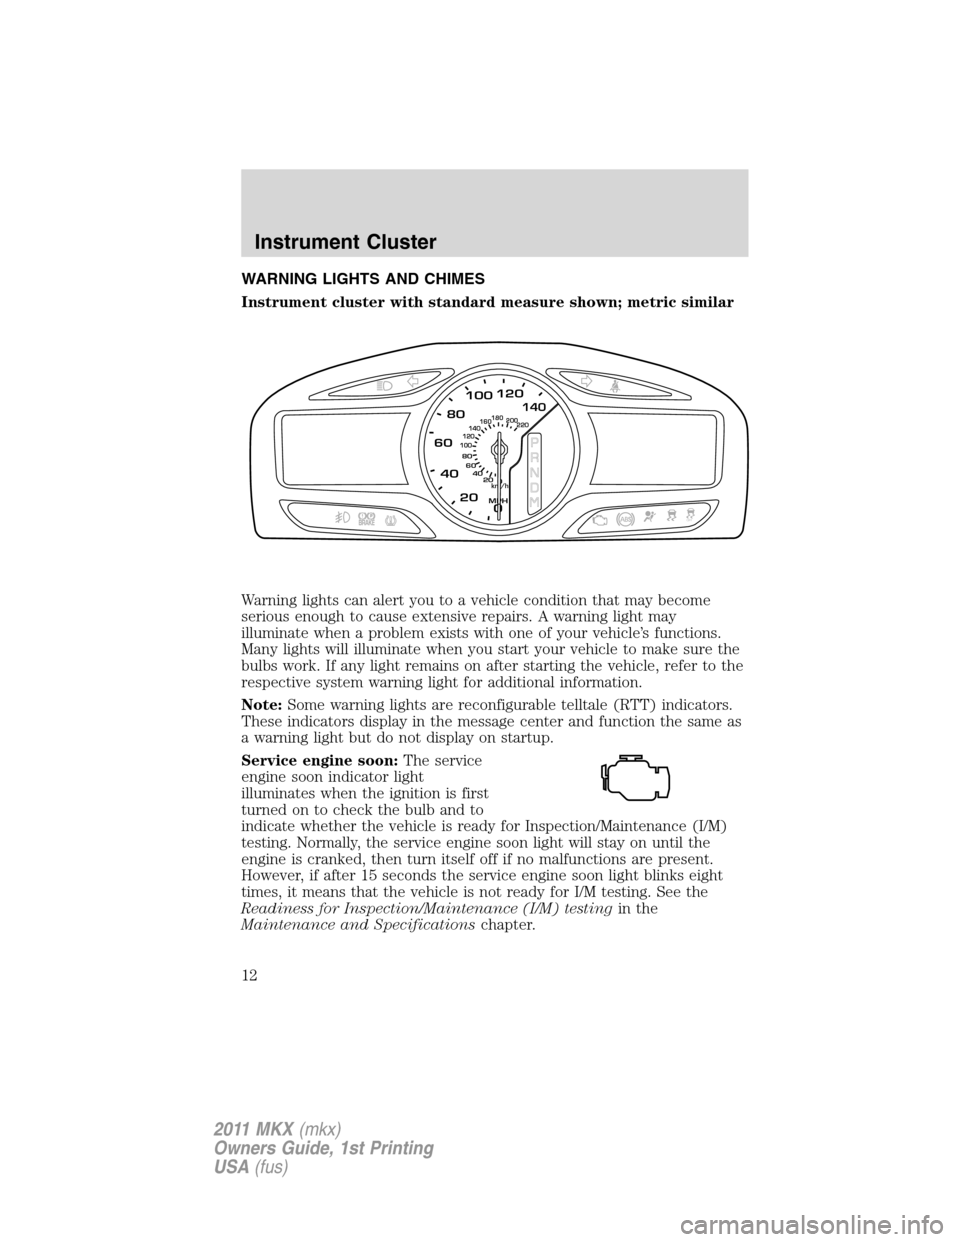 LINCOLN MKX 2011  Owners Manual WARNING LIGHTS AND CHIMES
Instrument cluster with standard measure shown; metric similar
Warning lights can alert you to a vehicle condition that may become
serious enough to cause extensive repairs. 